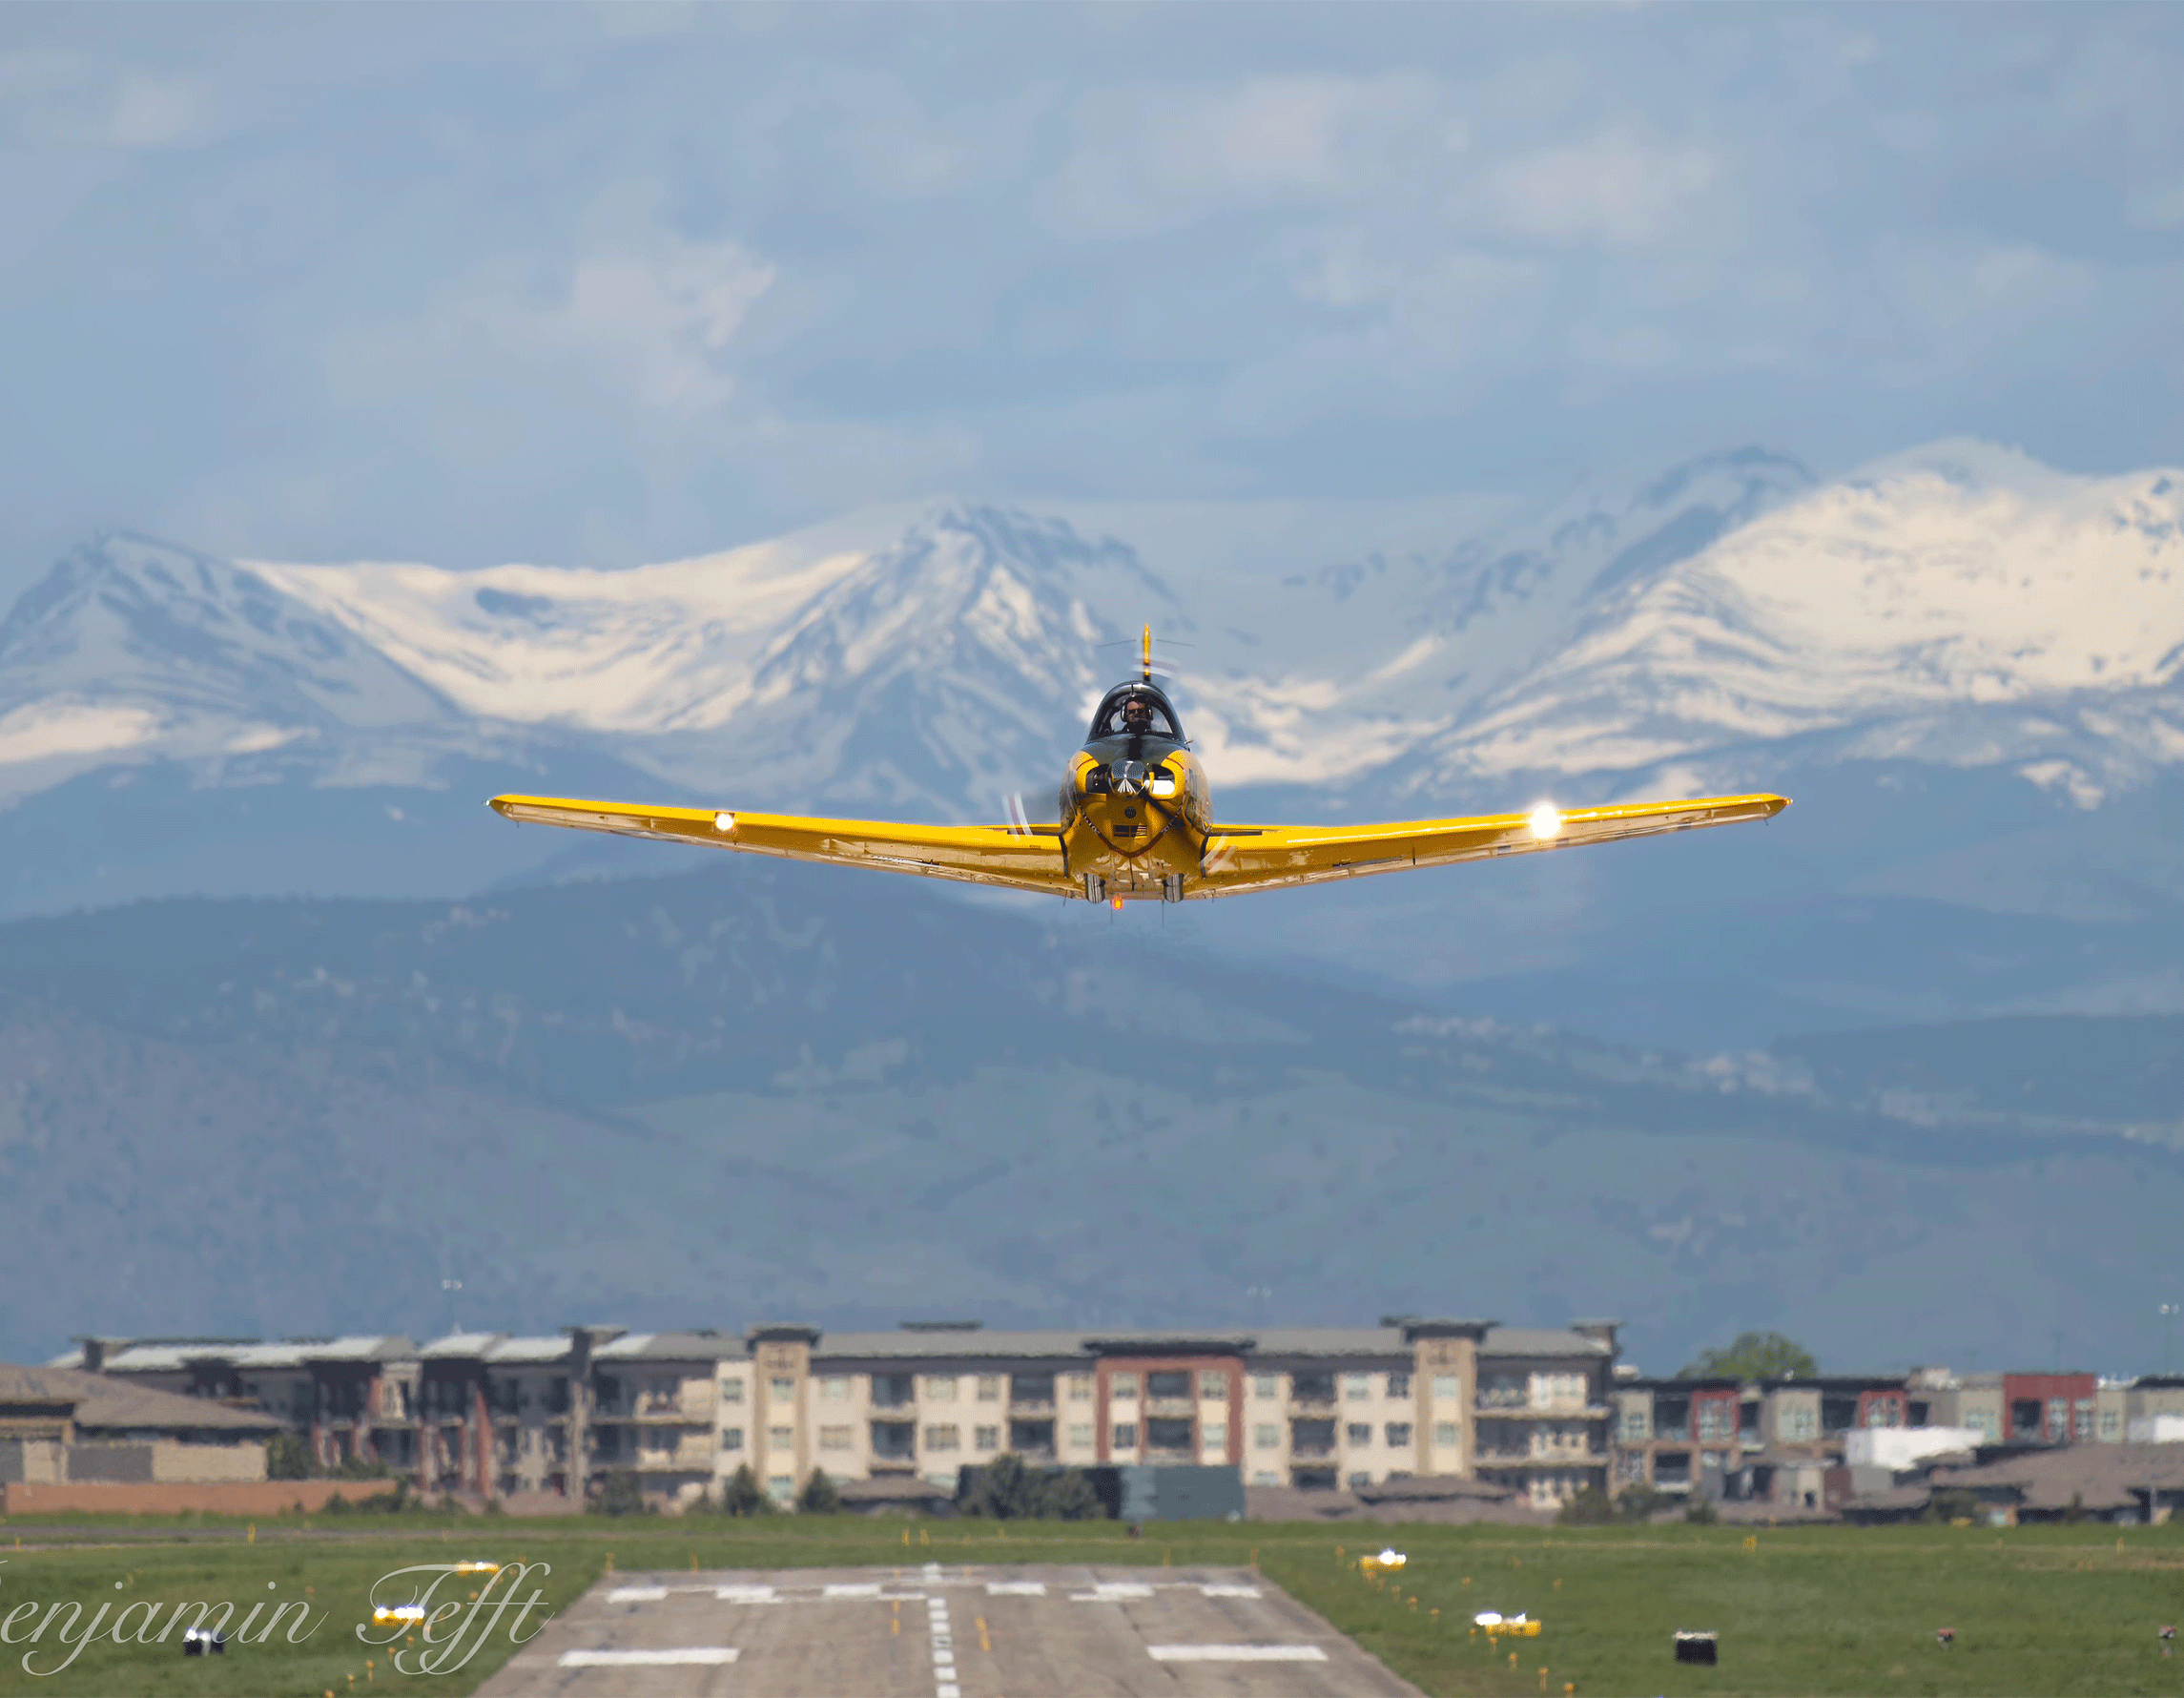 Airplane taking off from Centennial Airport